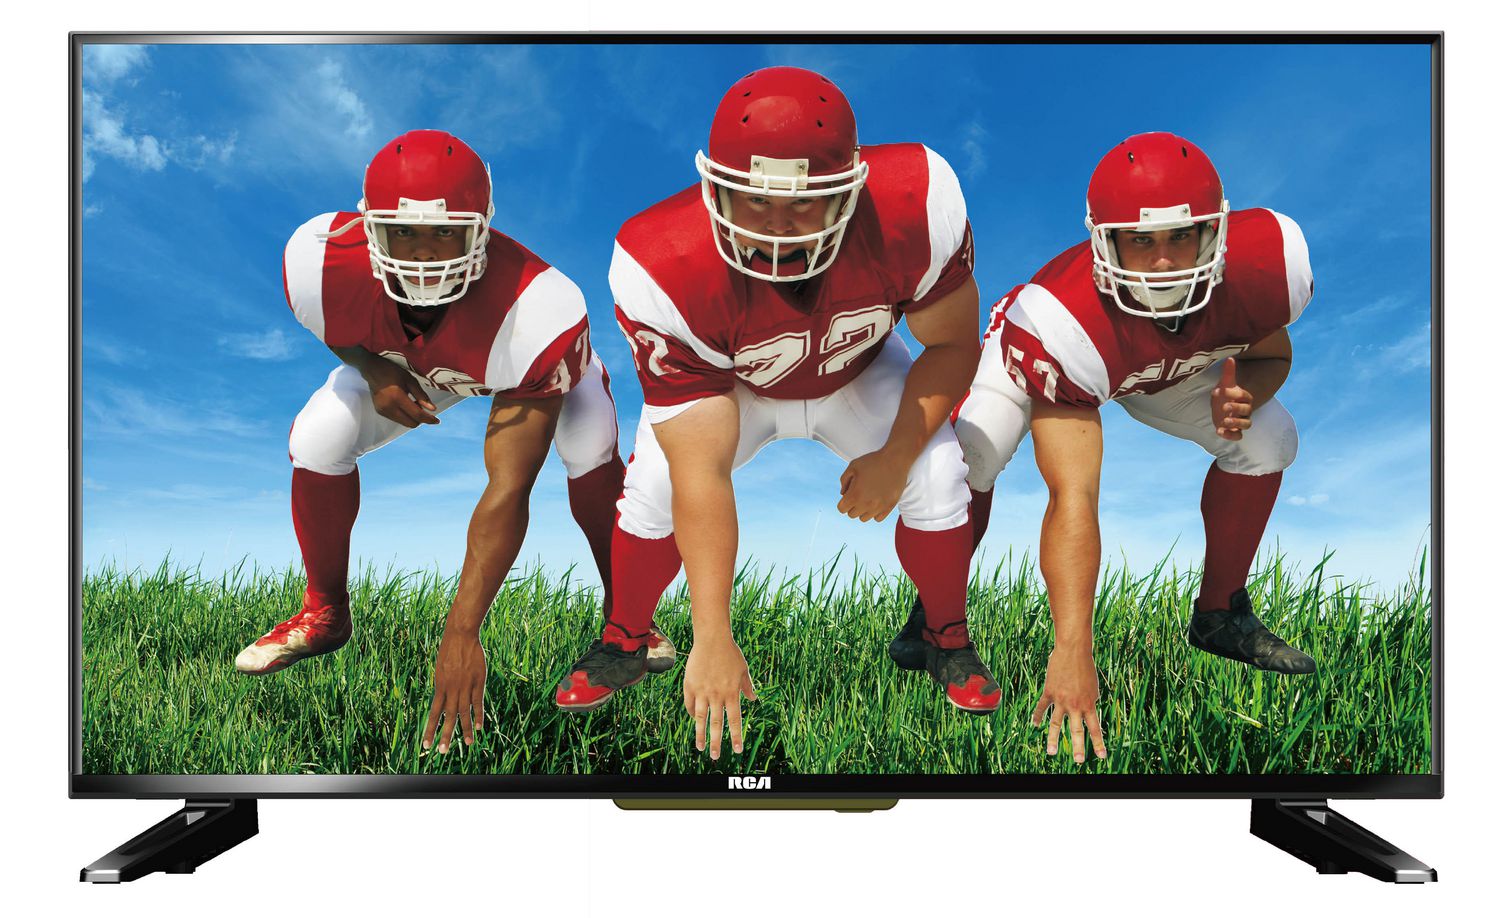 What are some common problems with RCA LCD TVs?